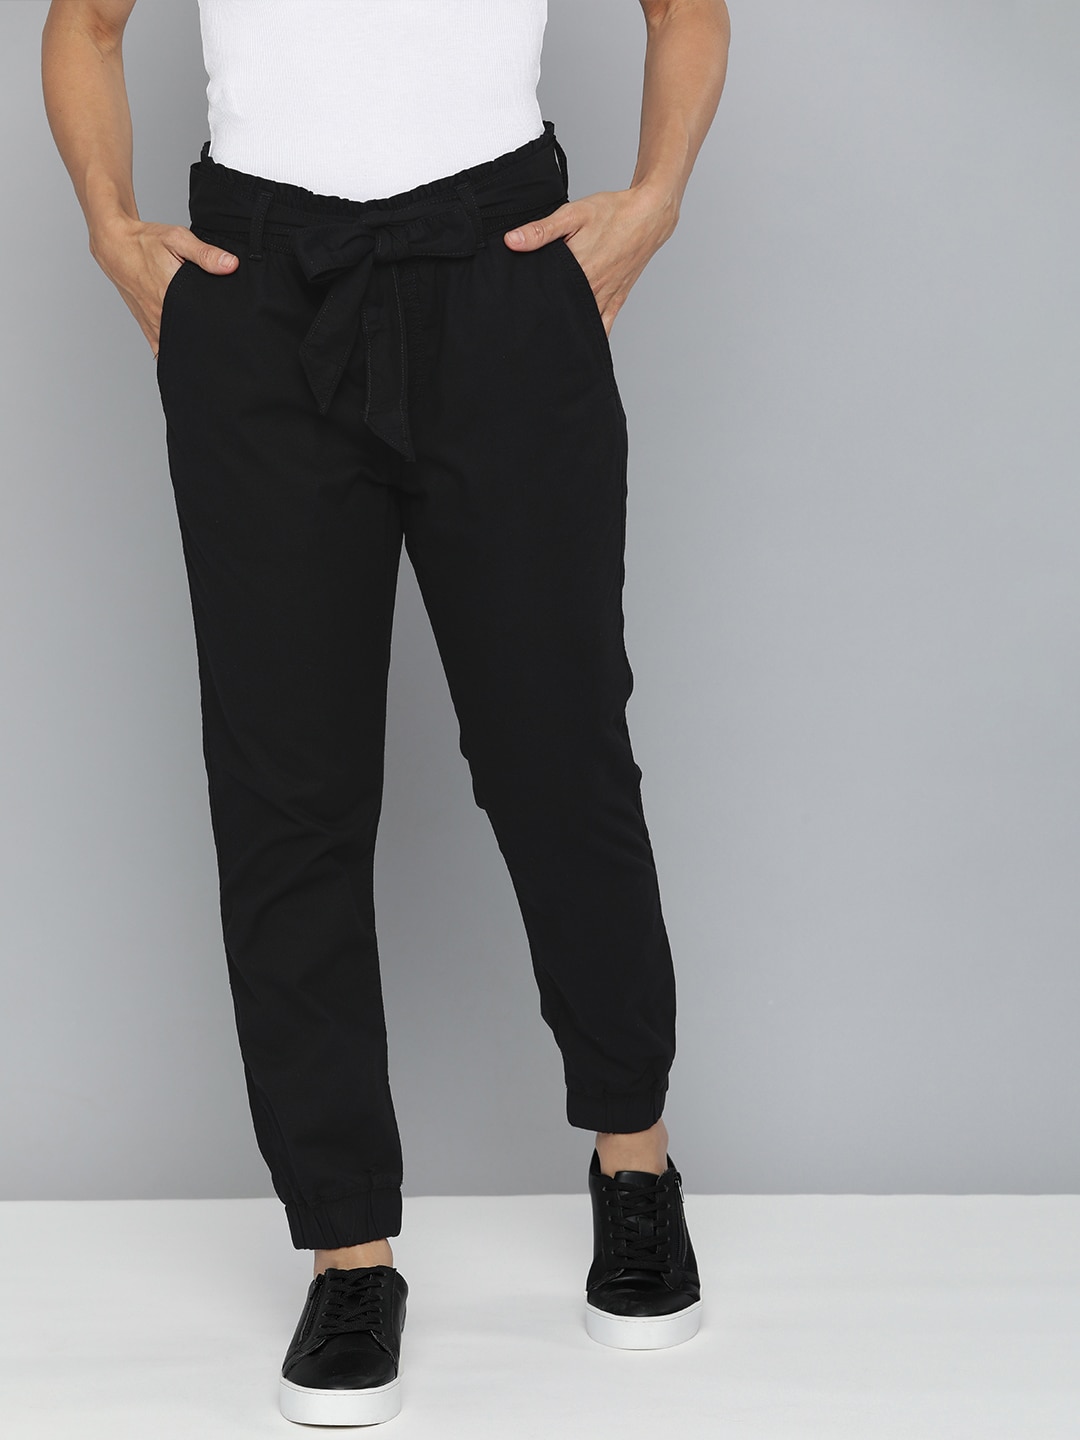 Levis Women Black Solid High-Rise Joggers Price in India